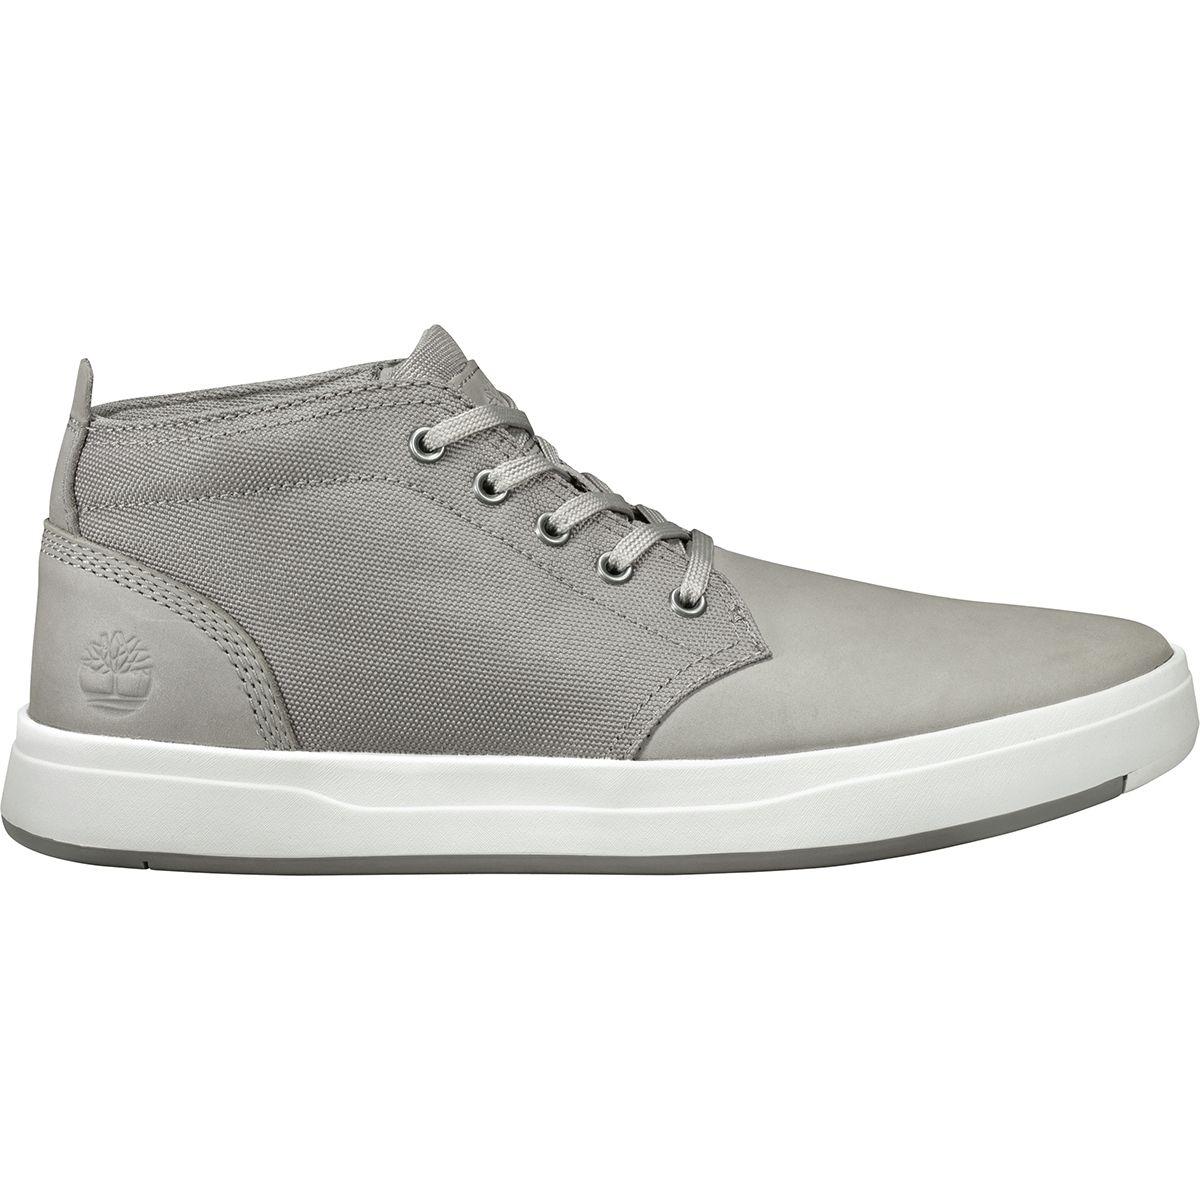 Timberland Davis Square Fabric & Leather Chukka in Gray for Men - Lyst